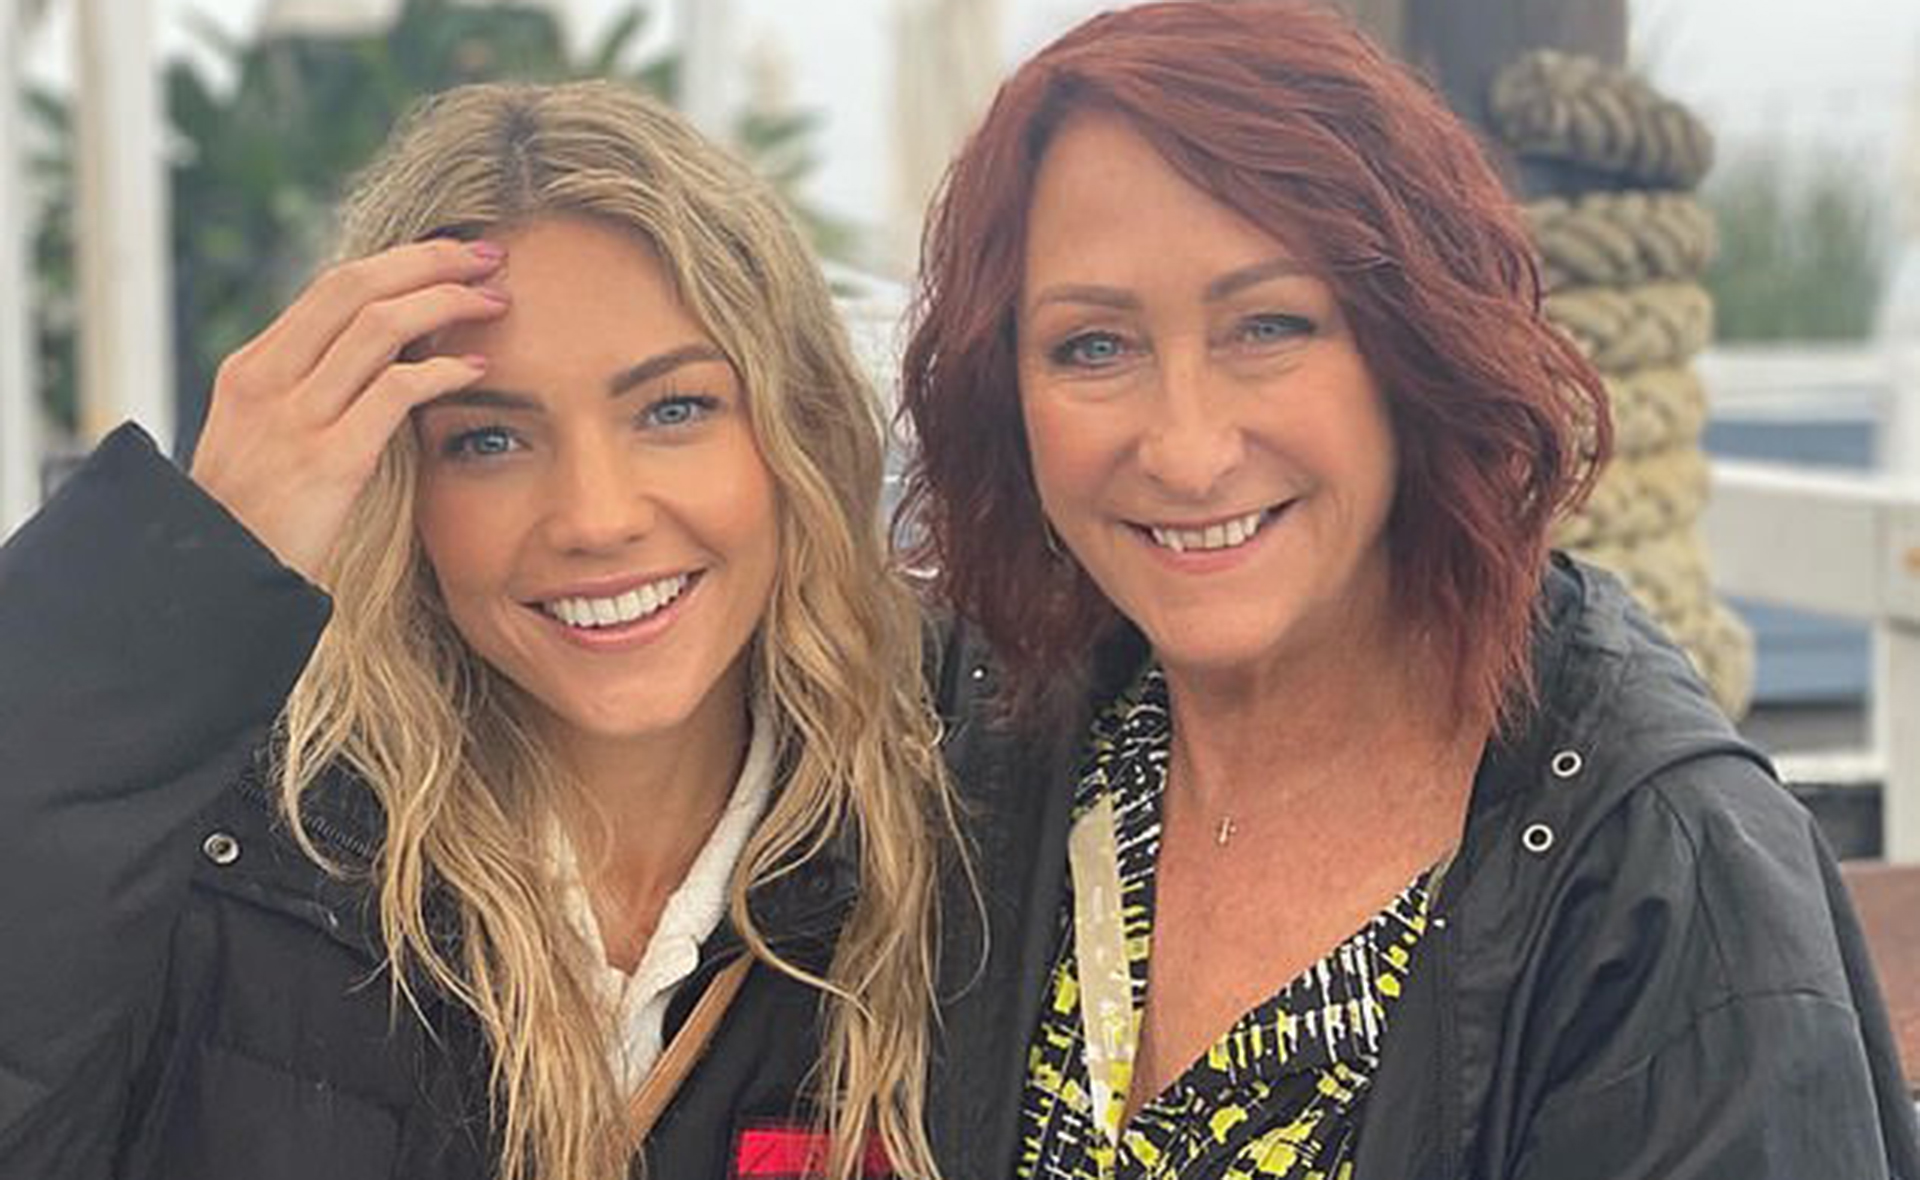 Home and Away star Lynne McGranger confirms Sam Frost is now vaccinated against COVID and could return to Summer Bay